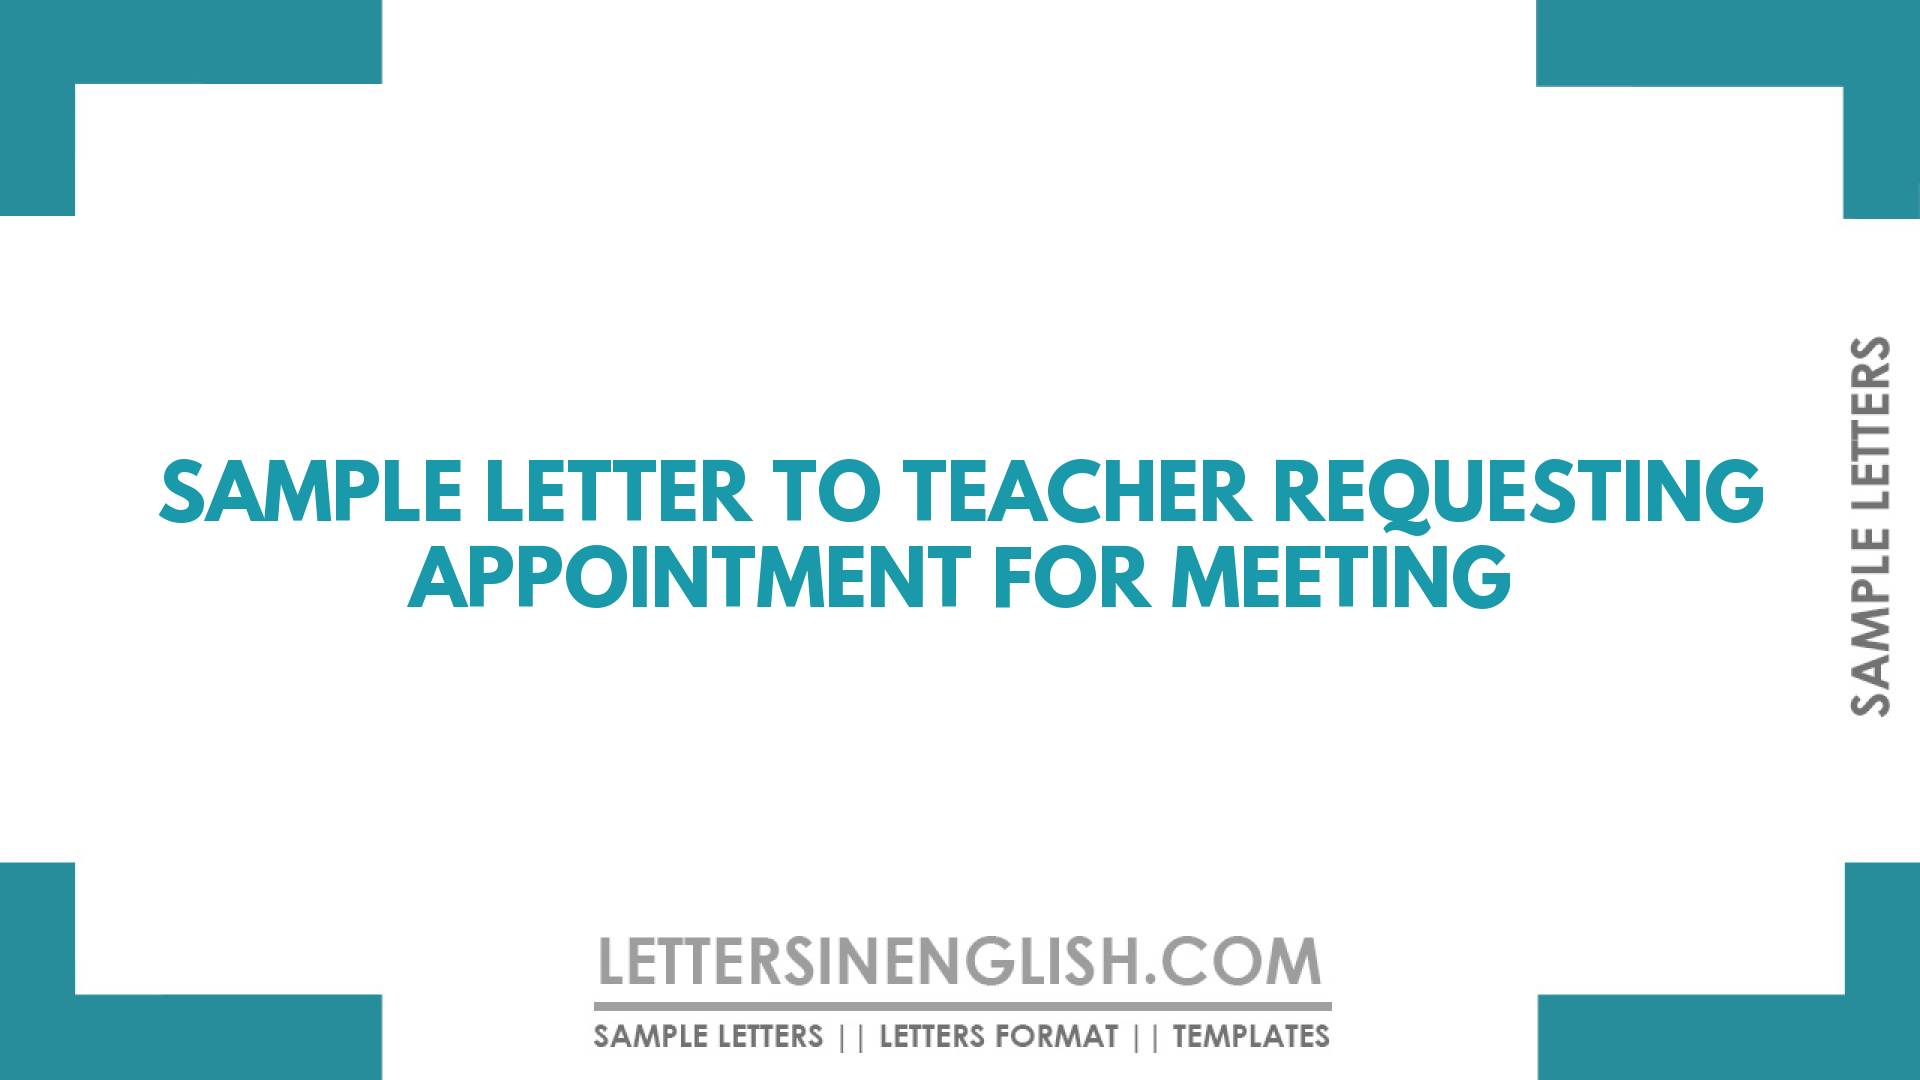 Sample Letter to Teacher Requesting Appointment For Meeting